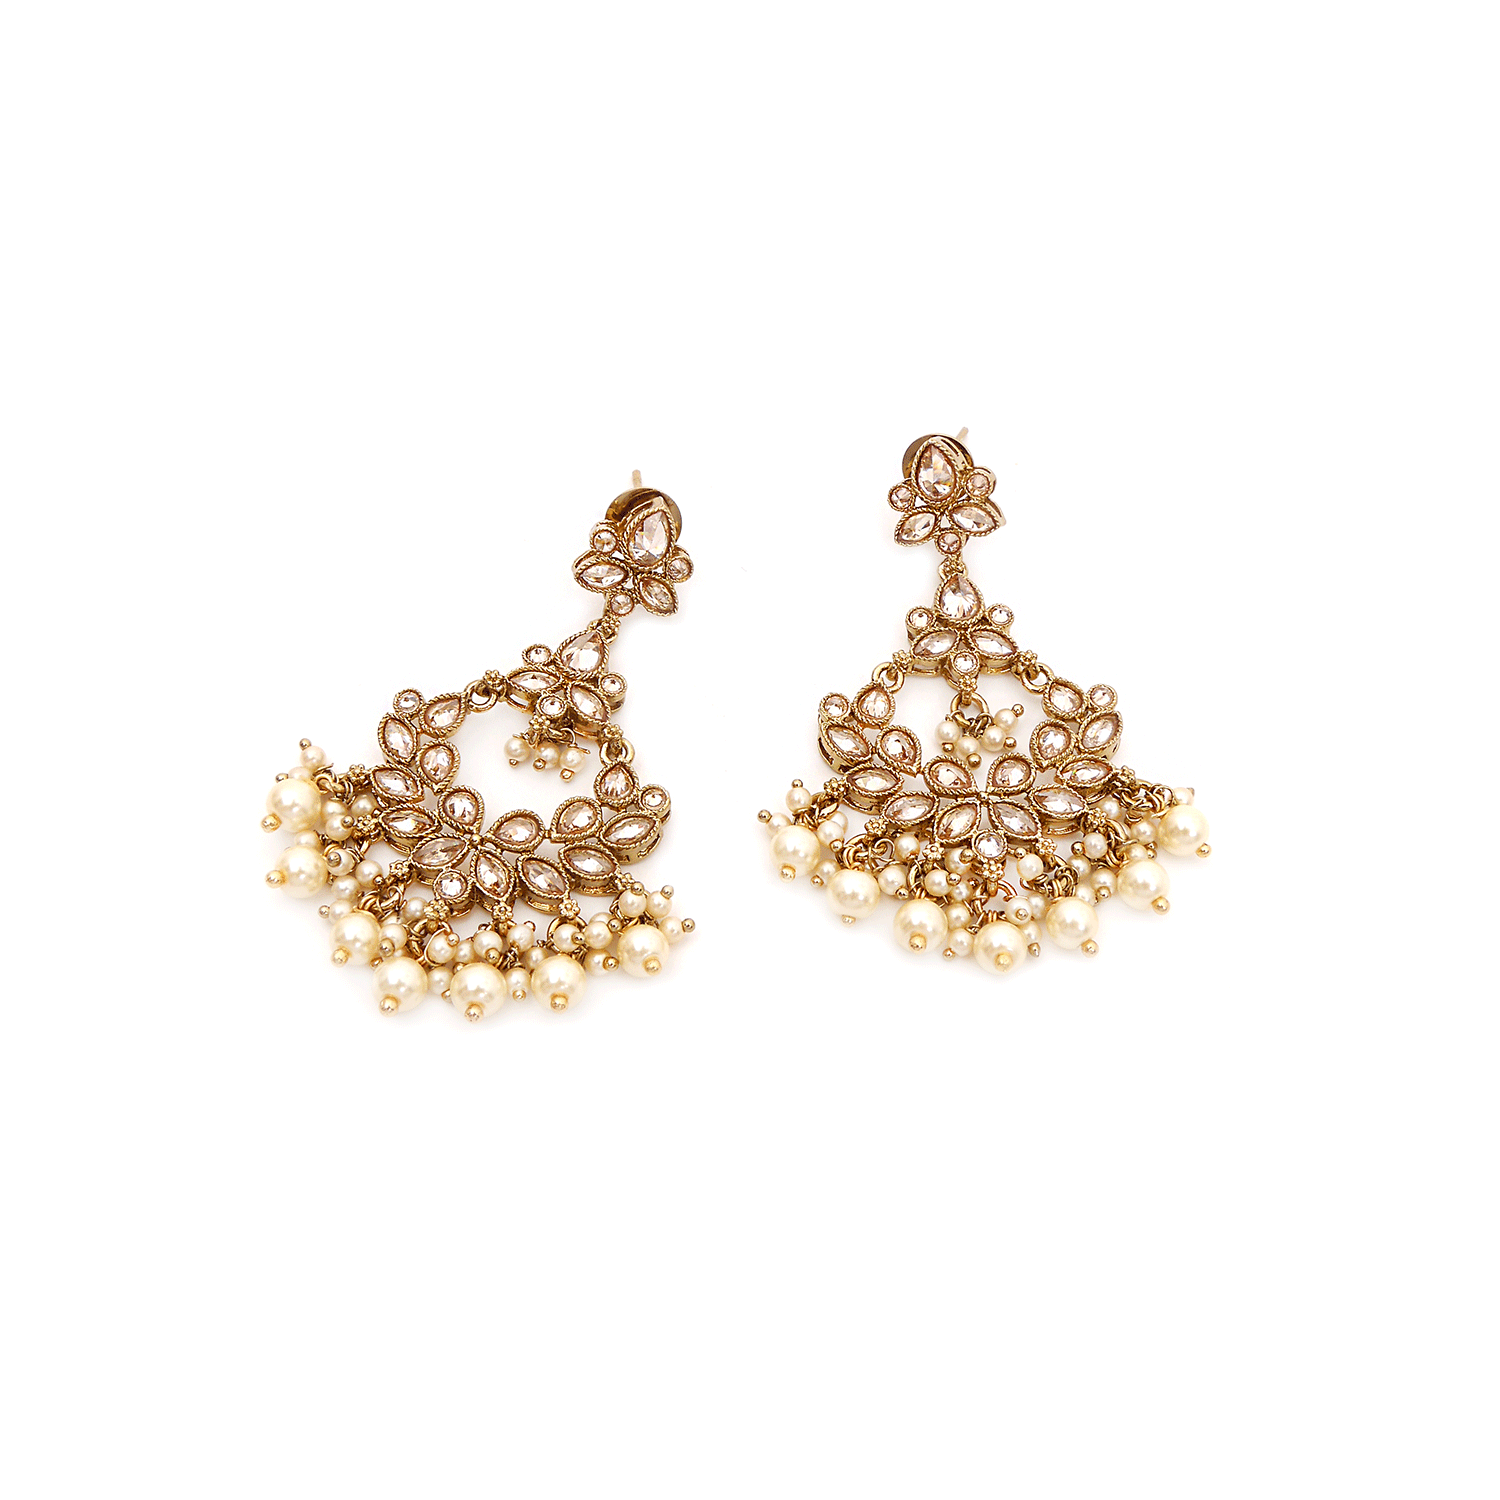 Camila Long Earrings in Pearl and Antique Gold